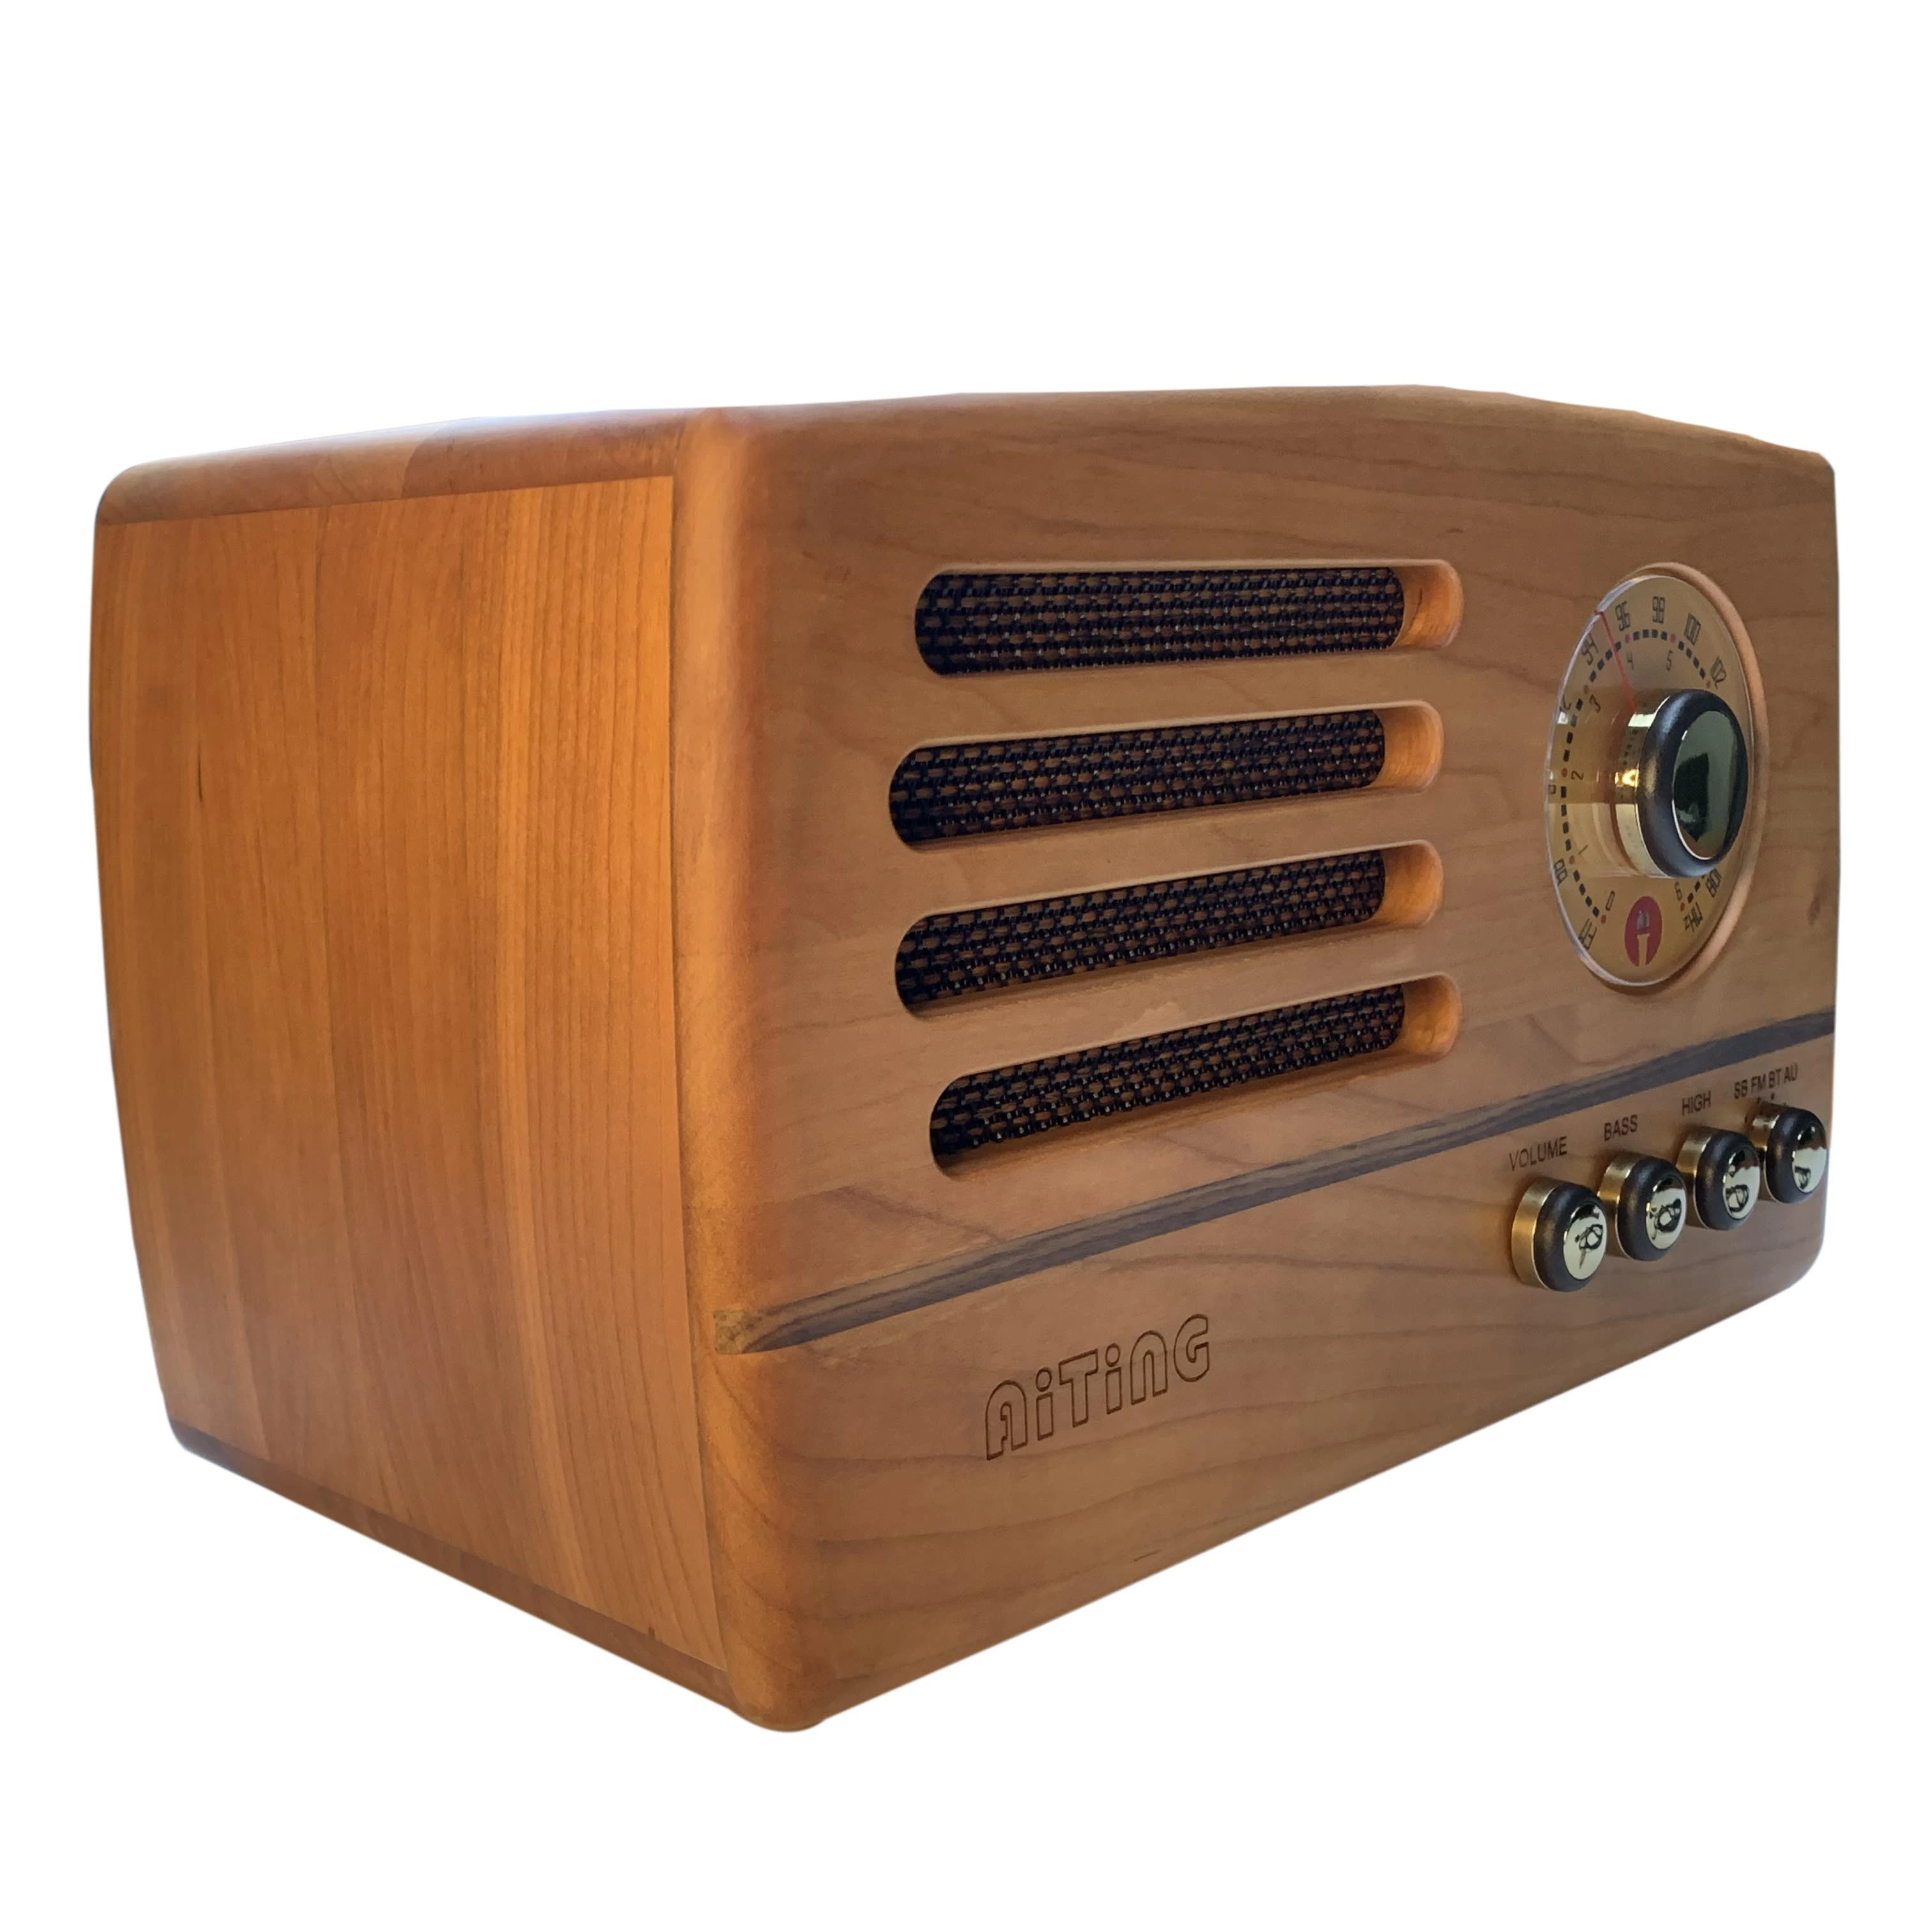 vee kosten passend High-grade Old-fashioned Retro Radio Fashion Wooden Connection Usb Fm Mp3  Speaker Can Be Customized - Buy Vintage Antique Radios,Wooden Retro  Turntable With Radio,Portable Speaker Product on Alibaba.com